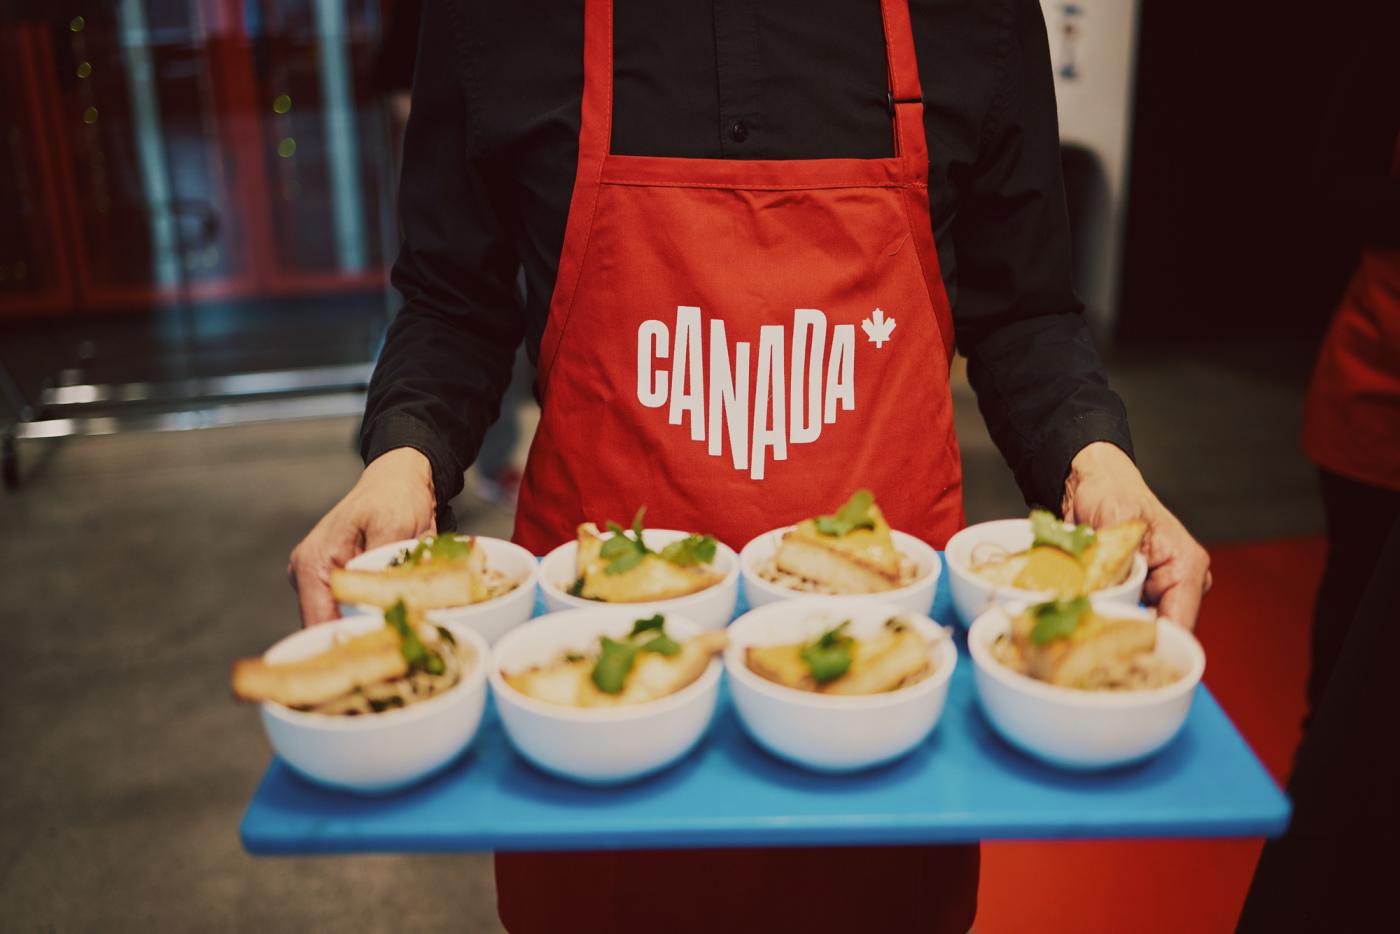 A server holds a tray of appetizers. The server is wearing a solid red apron with a white Canada logo printed in the centre